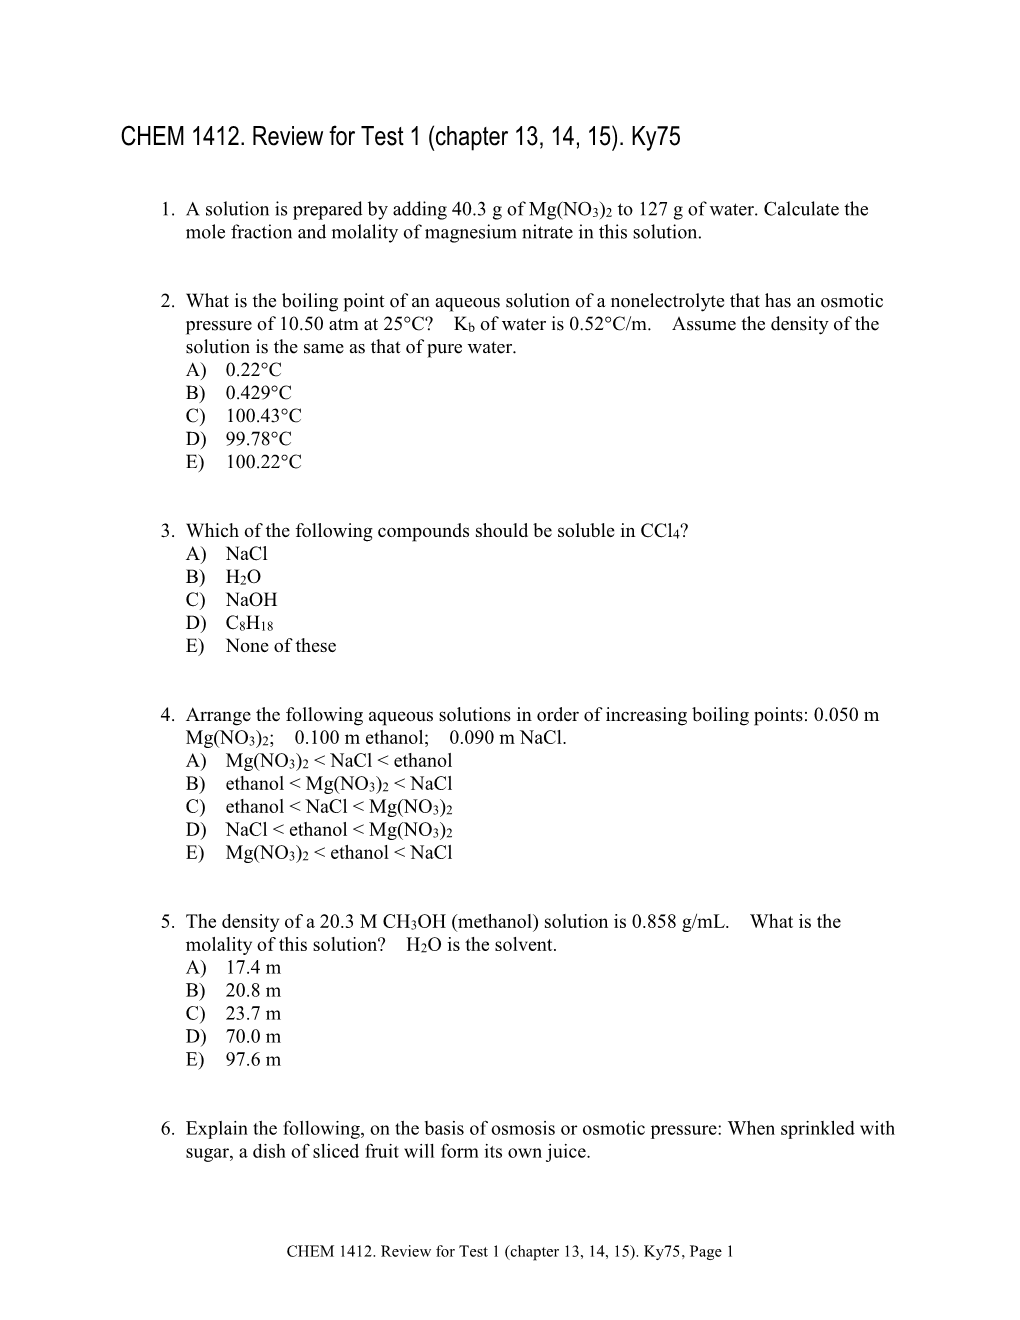 CHEM 1412. Review for Test 1 (Chapter 13, 14, 15). Ky75